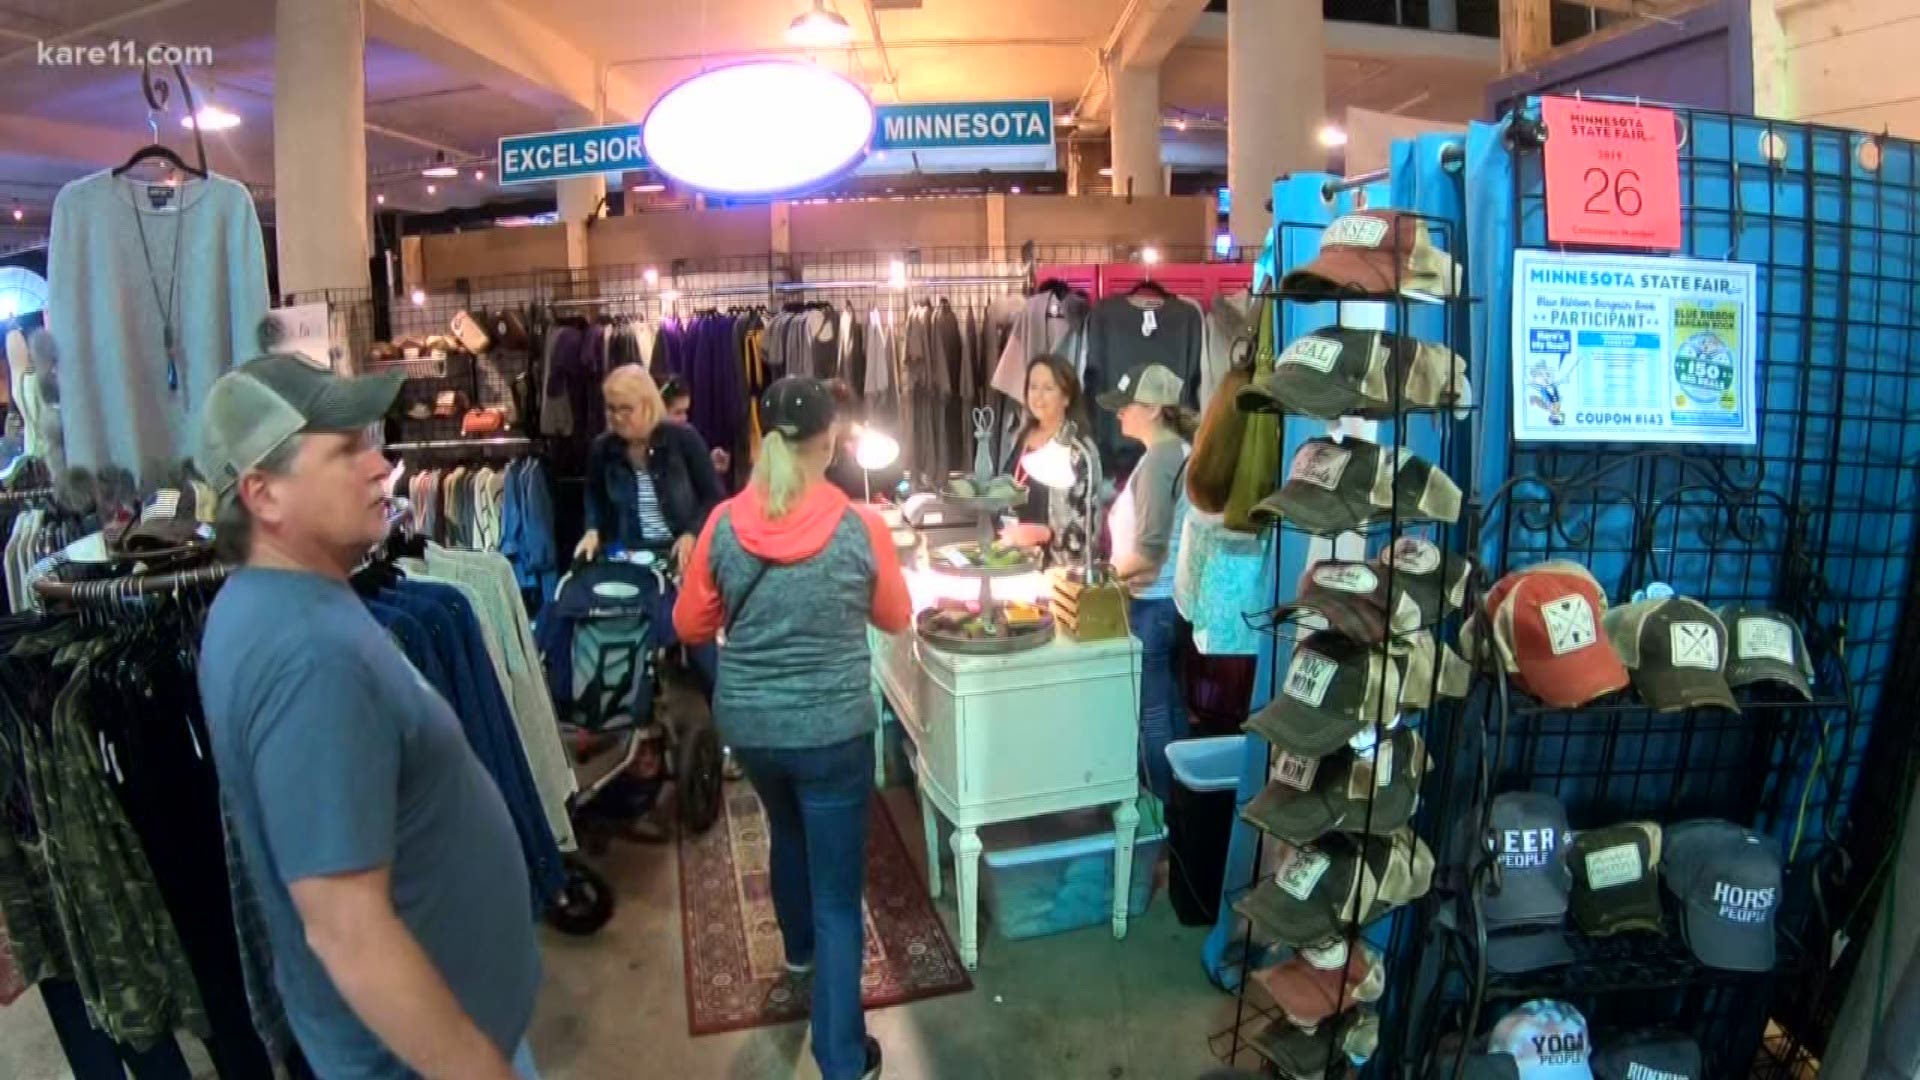 Vendors have a chance to show off products and promote their shops to the Fair's record-setting crowds.